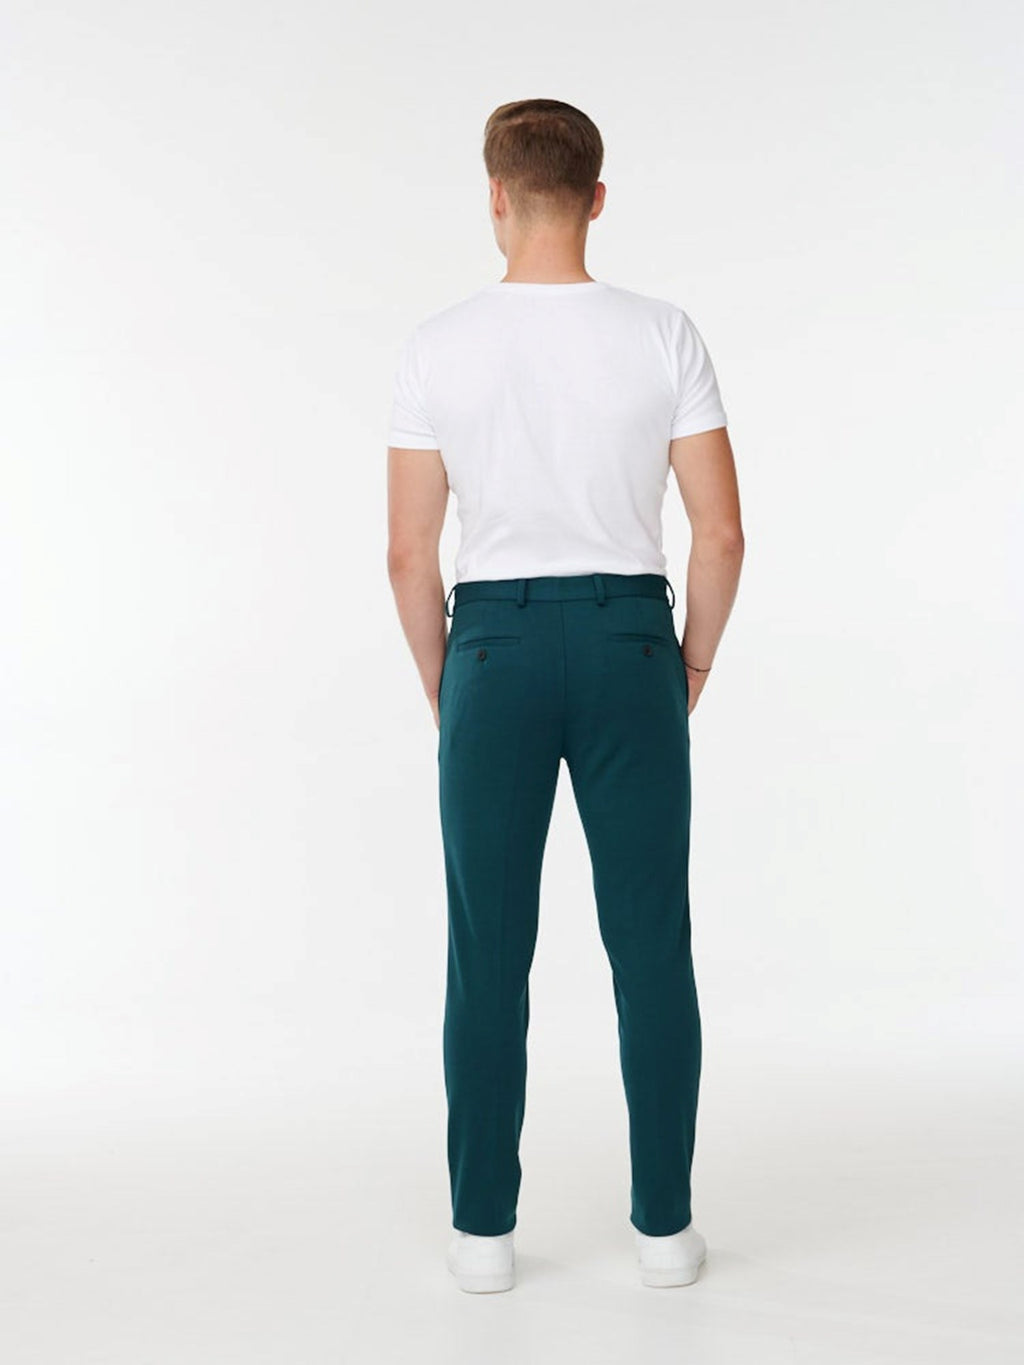 Performance Trousers - Green